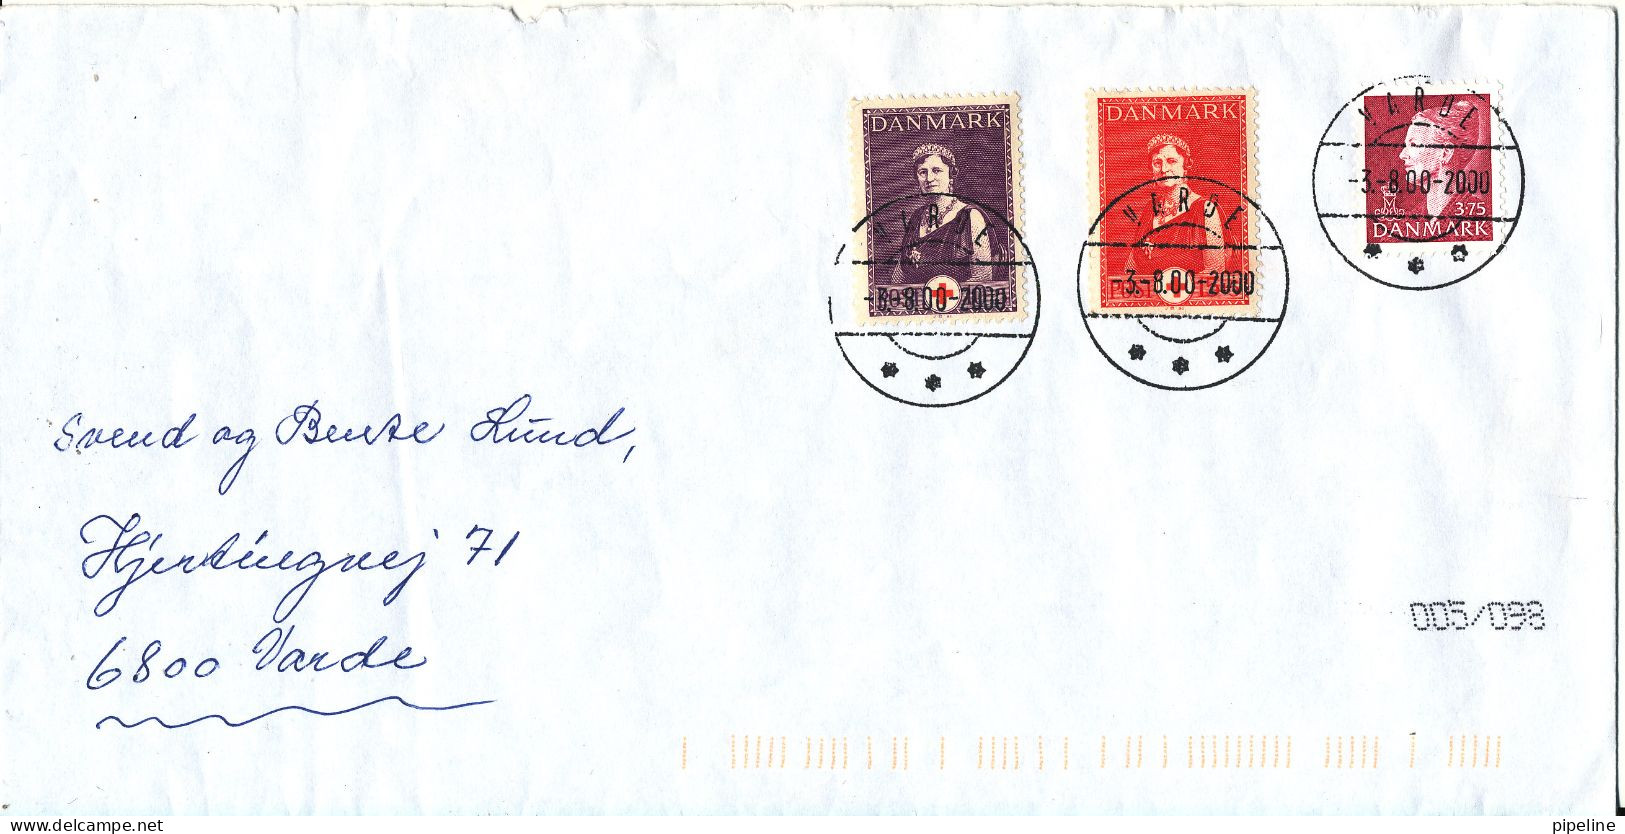 Denmark Cover 3-8-2000 With Some Older Danish Stamps The Flap On The Backside Of The Cover Is Missing - Covers & Documents